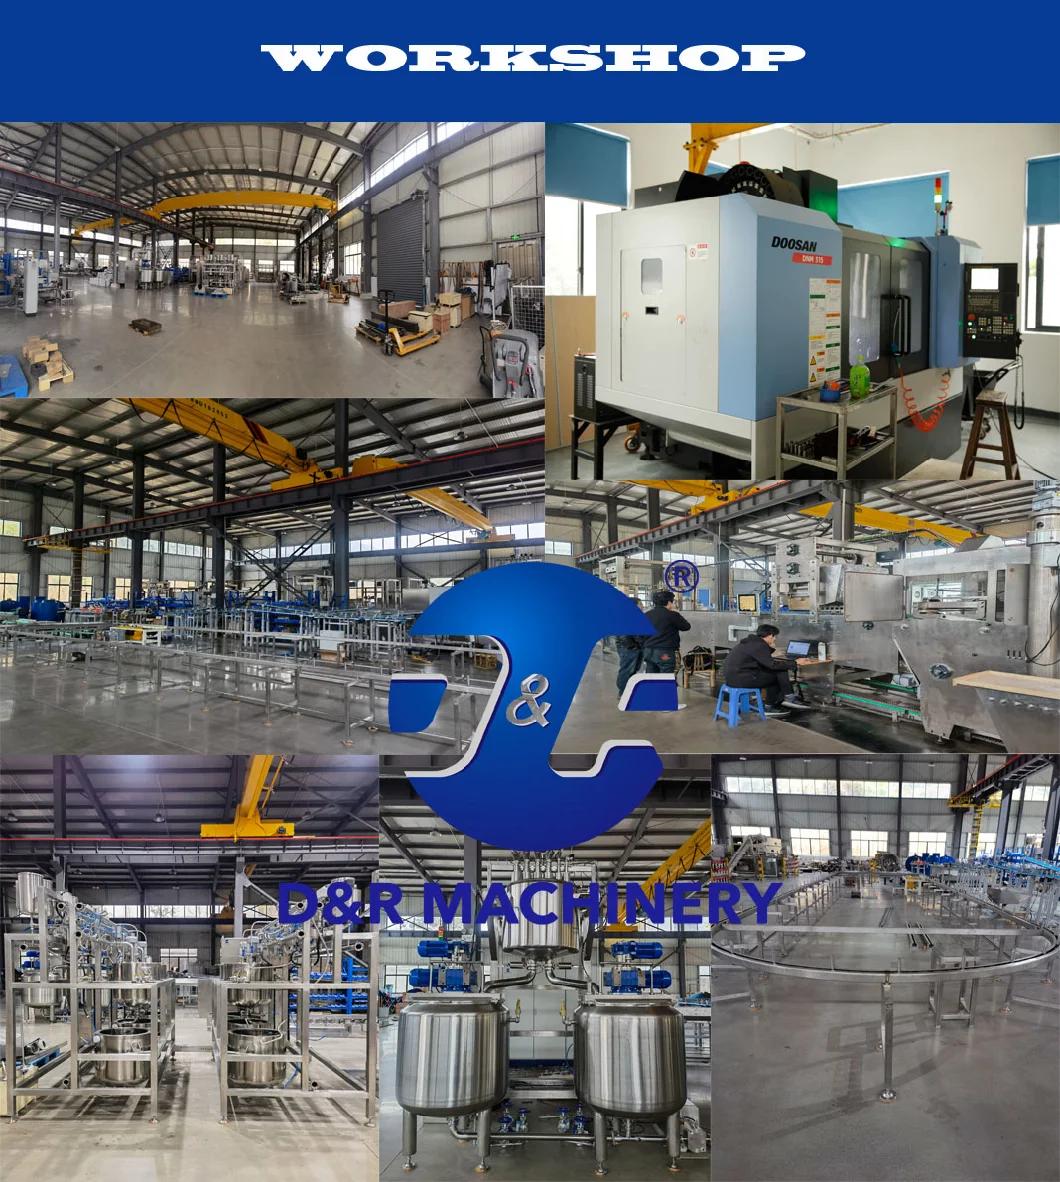 Lollipop Making Equipment Confectionery Manufacturing Process